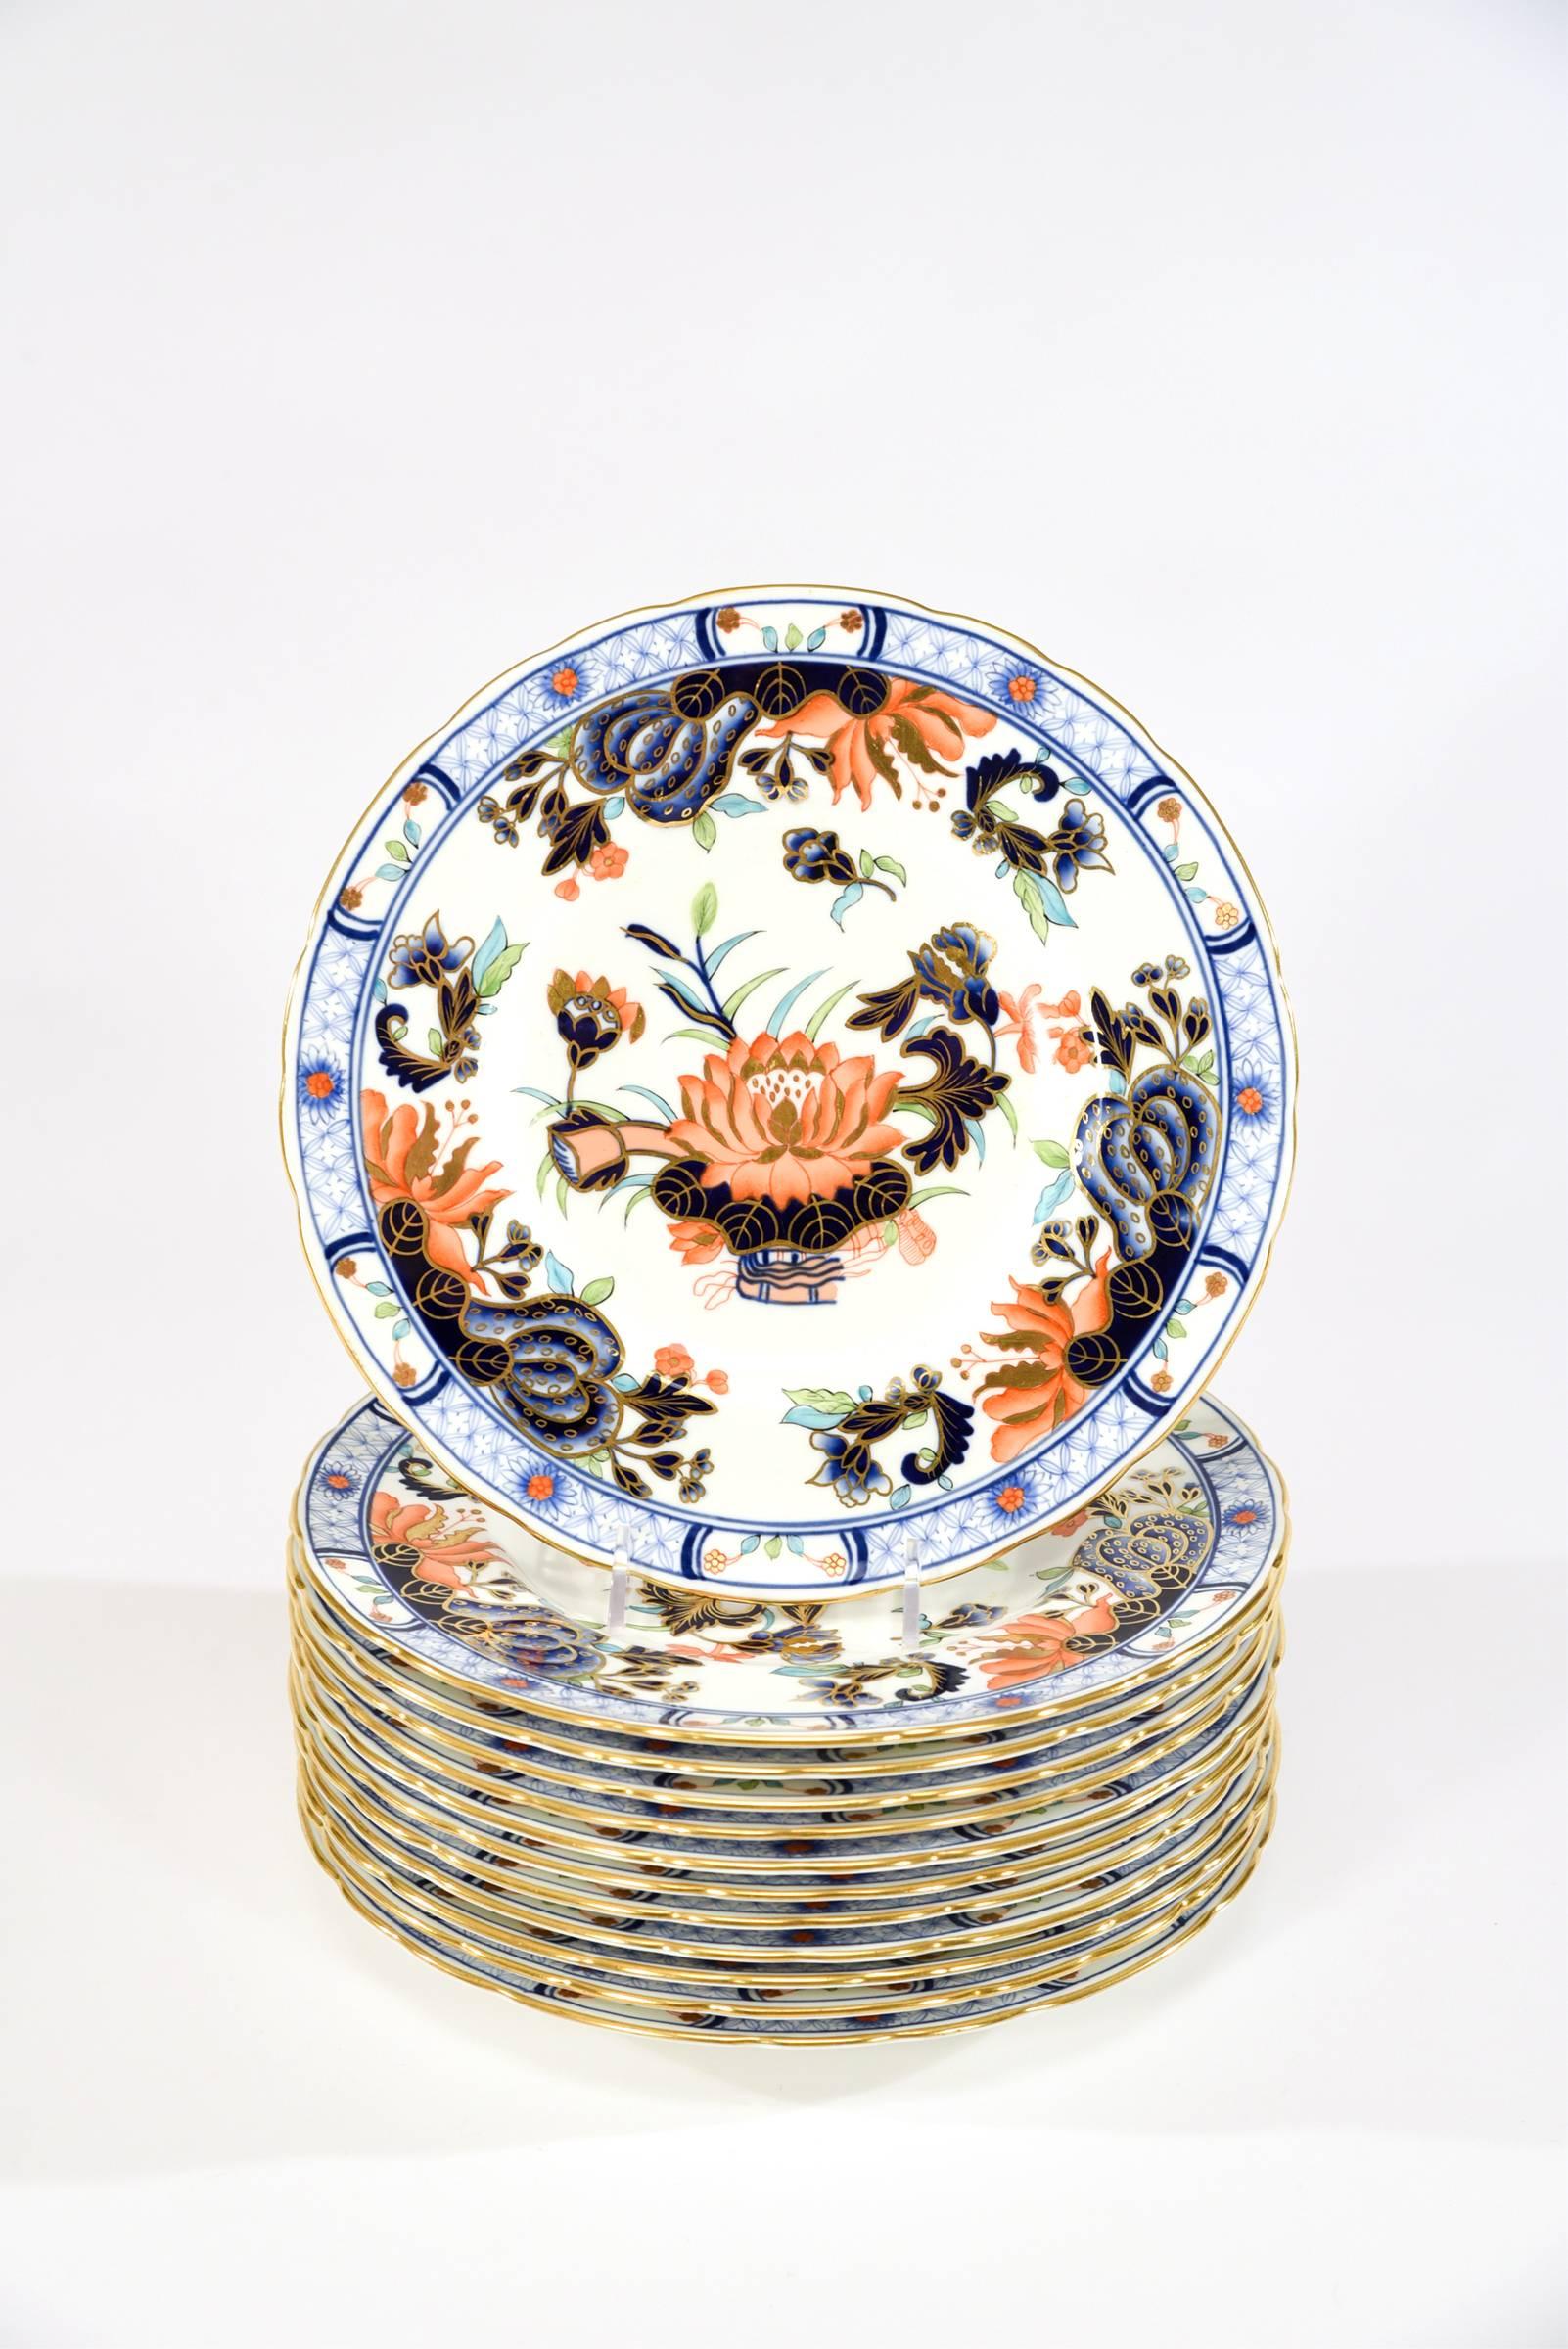 The polychrome enamel Japonesque motif, using the Imari palette decorates these 12 pristine dessert plates made by Royal Crown Derby. The combination of soft blue, cobalt blue, bittersweet orange and green all trimmed and highlighted in gold makes